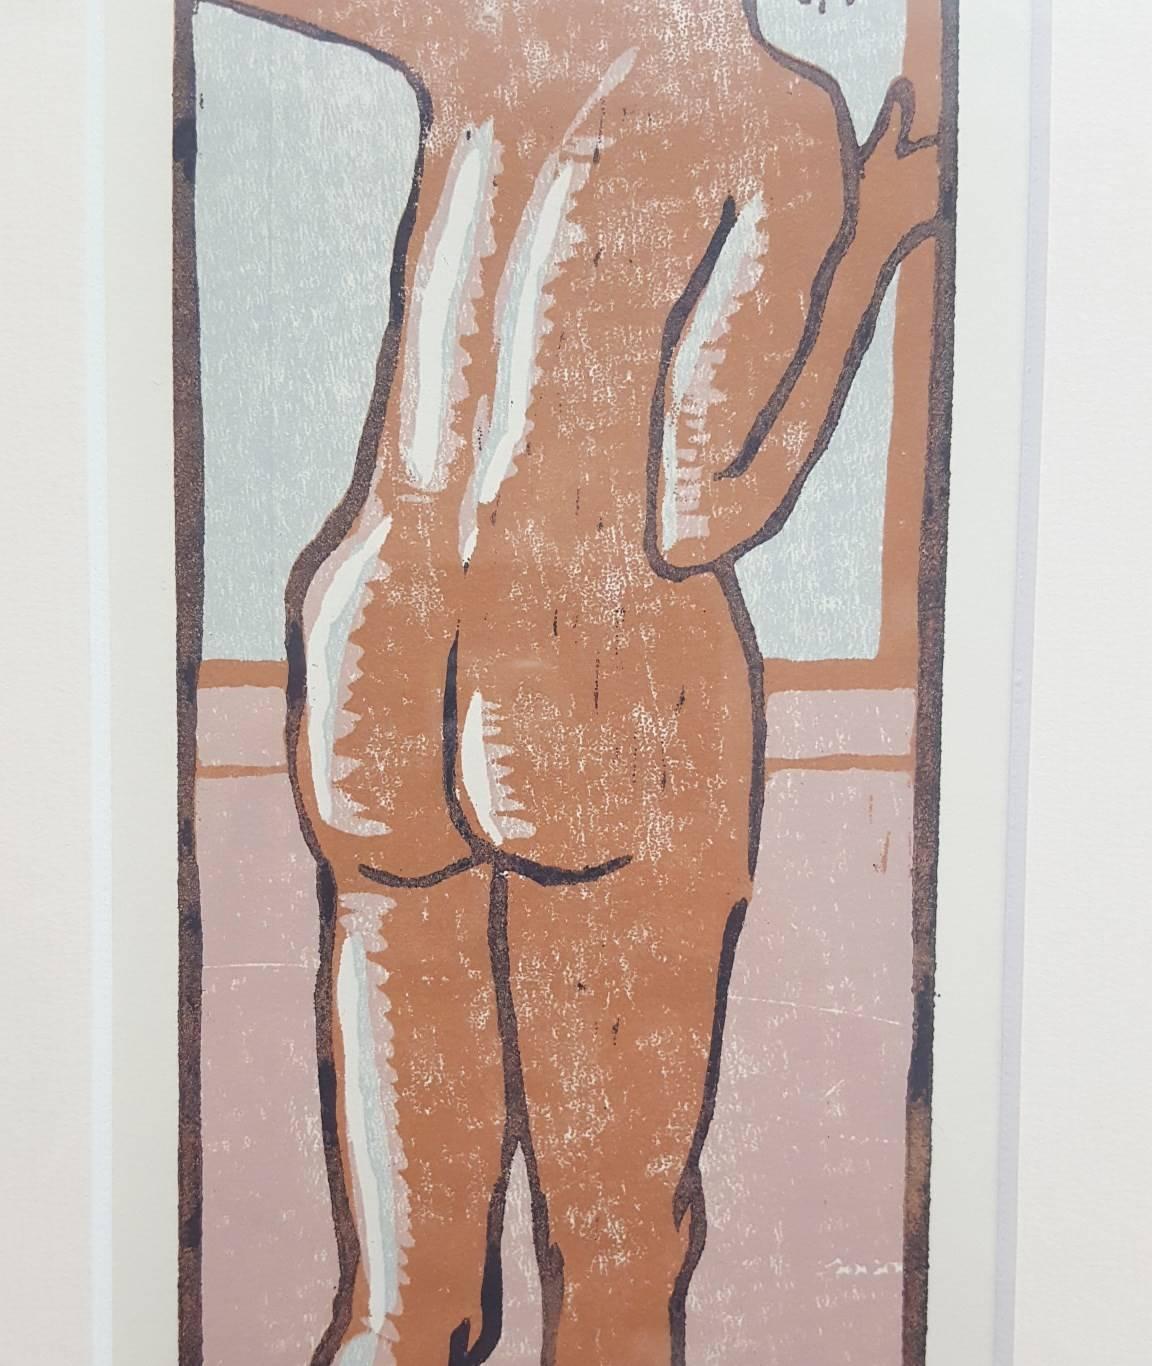 An original woodcut engraving by American artist Vincent Torre (1930-) titled "Nude Looking Out A Window", 1978. Limited edition: 67/100. This work comes from the "Forty Four Woodcuts of the Nude" executed in 1978. Limited